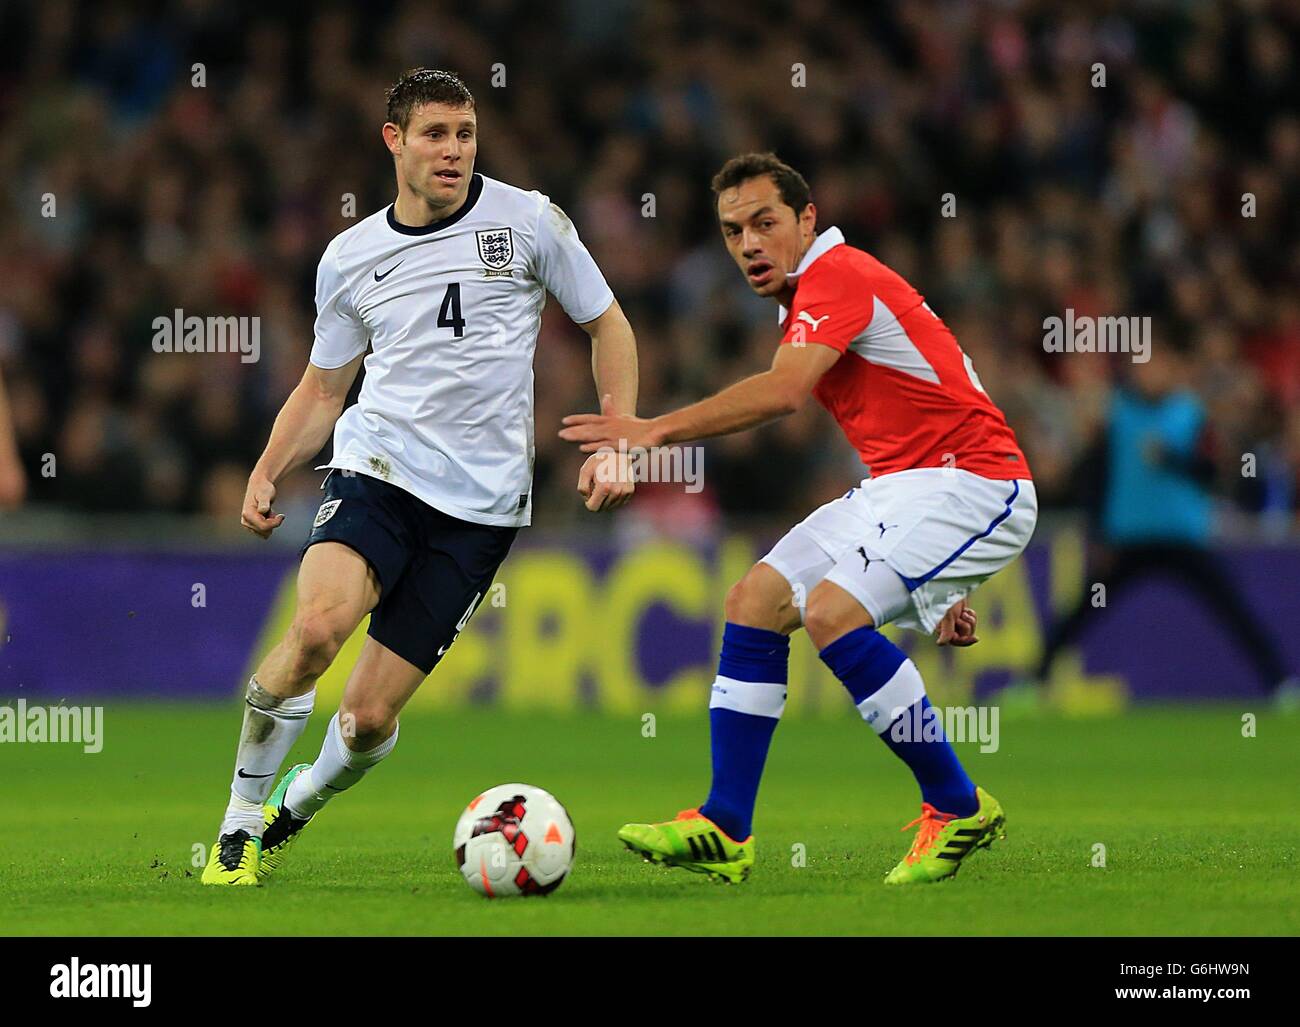 Soccer - International Friendly - England v Chile - Wembley Stadium. Chile's Marcelo Diaz (right) and England's James Milner battle for the ball Stock Photo